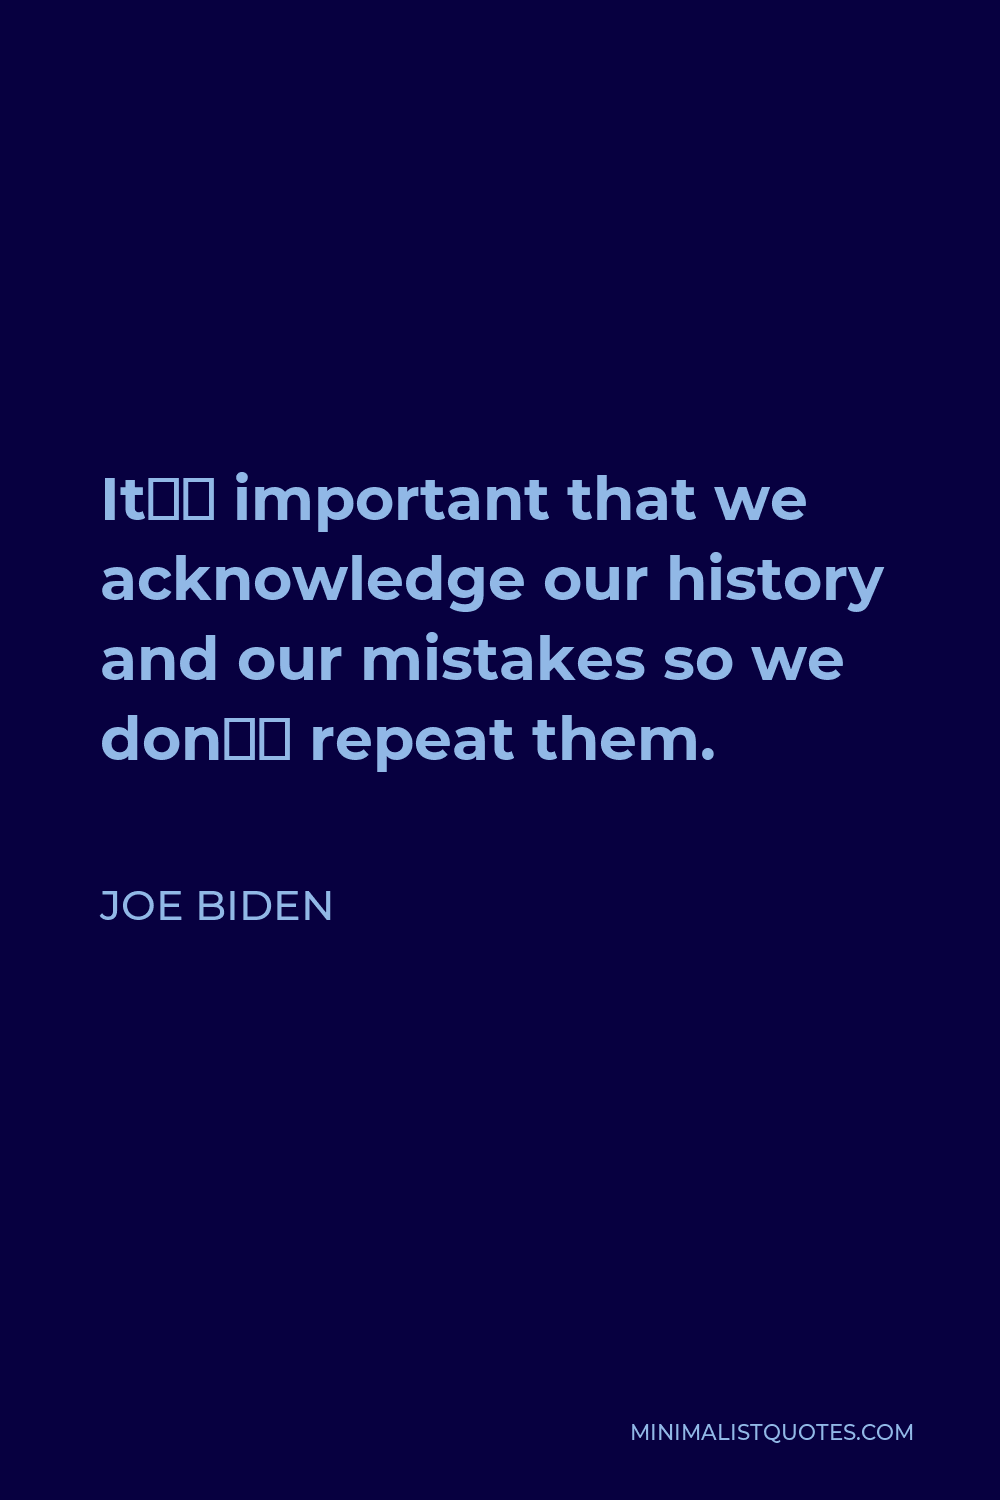 Joe Biden Quote - It’s important that we acknowledge our history and our mistakes so we don’t repeat them.